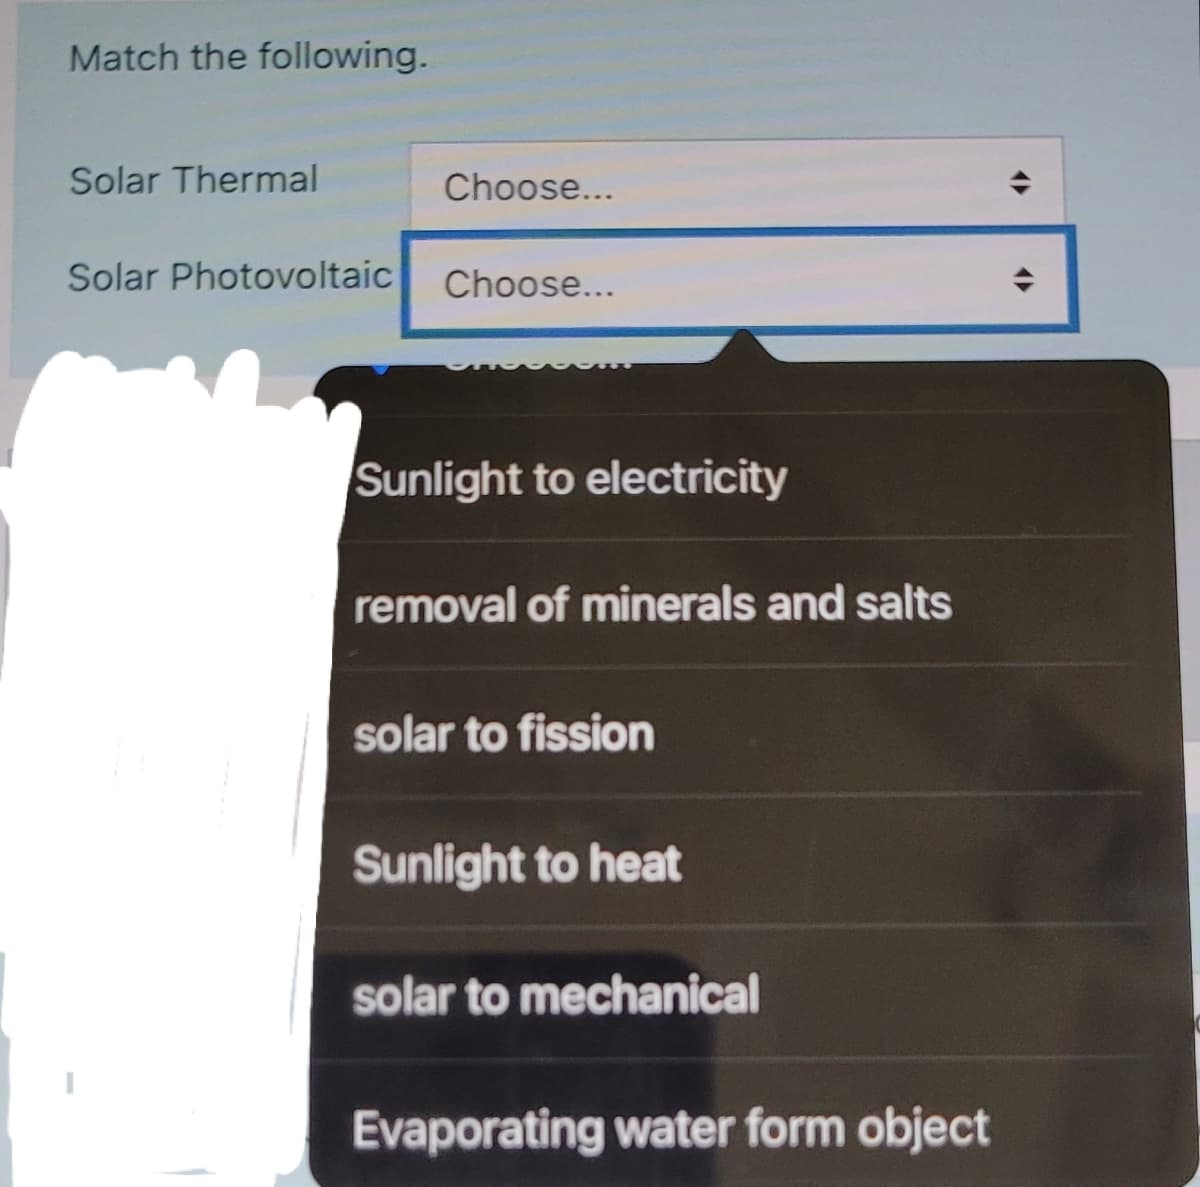 Match the following.
Solar Thermal
Choose...
Solar Photovoltaic
Choose...
Sunlight to electricity
removal of minerals and salts
solar to fission
Sunlight to heat
solar to mechanical
Evaporating water form object
